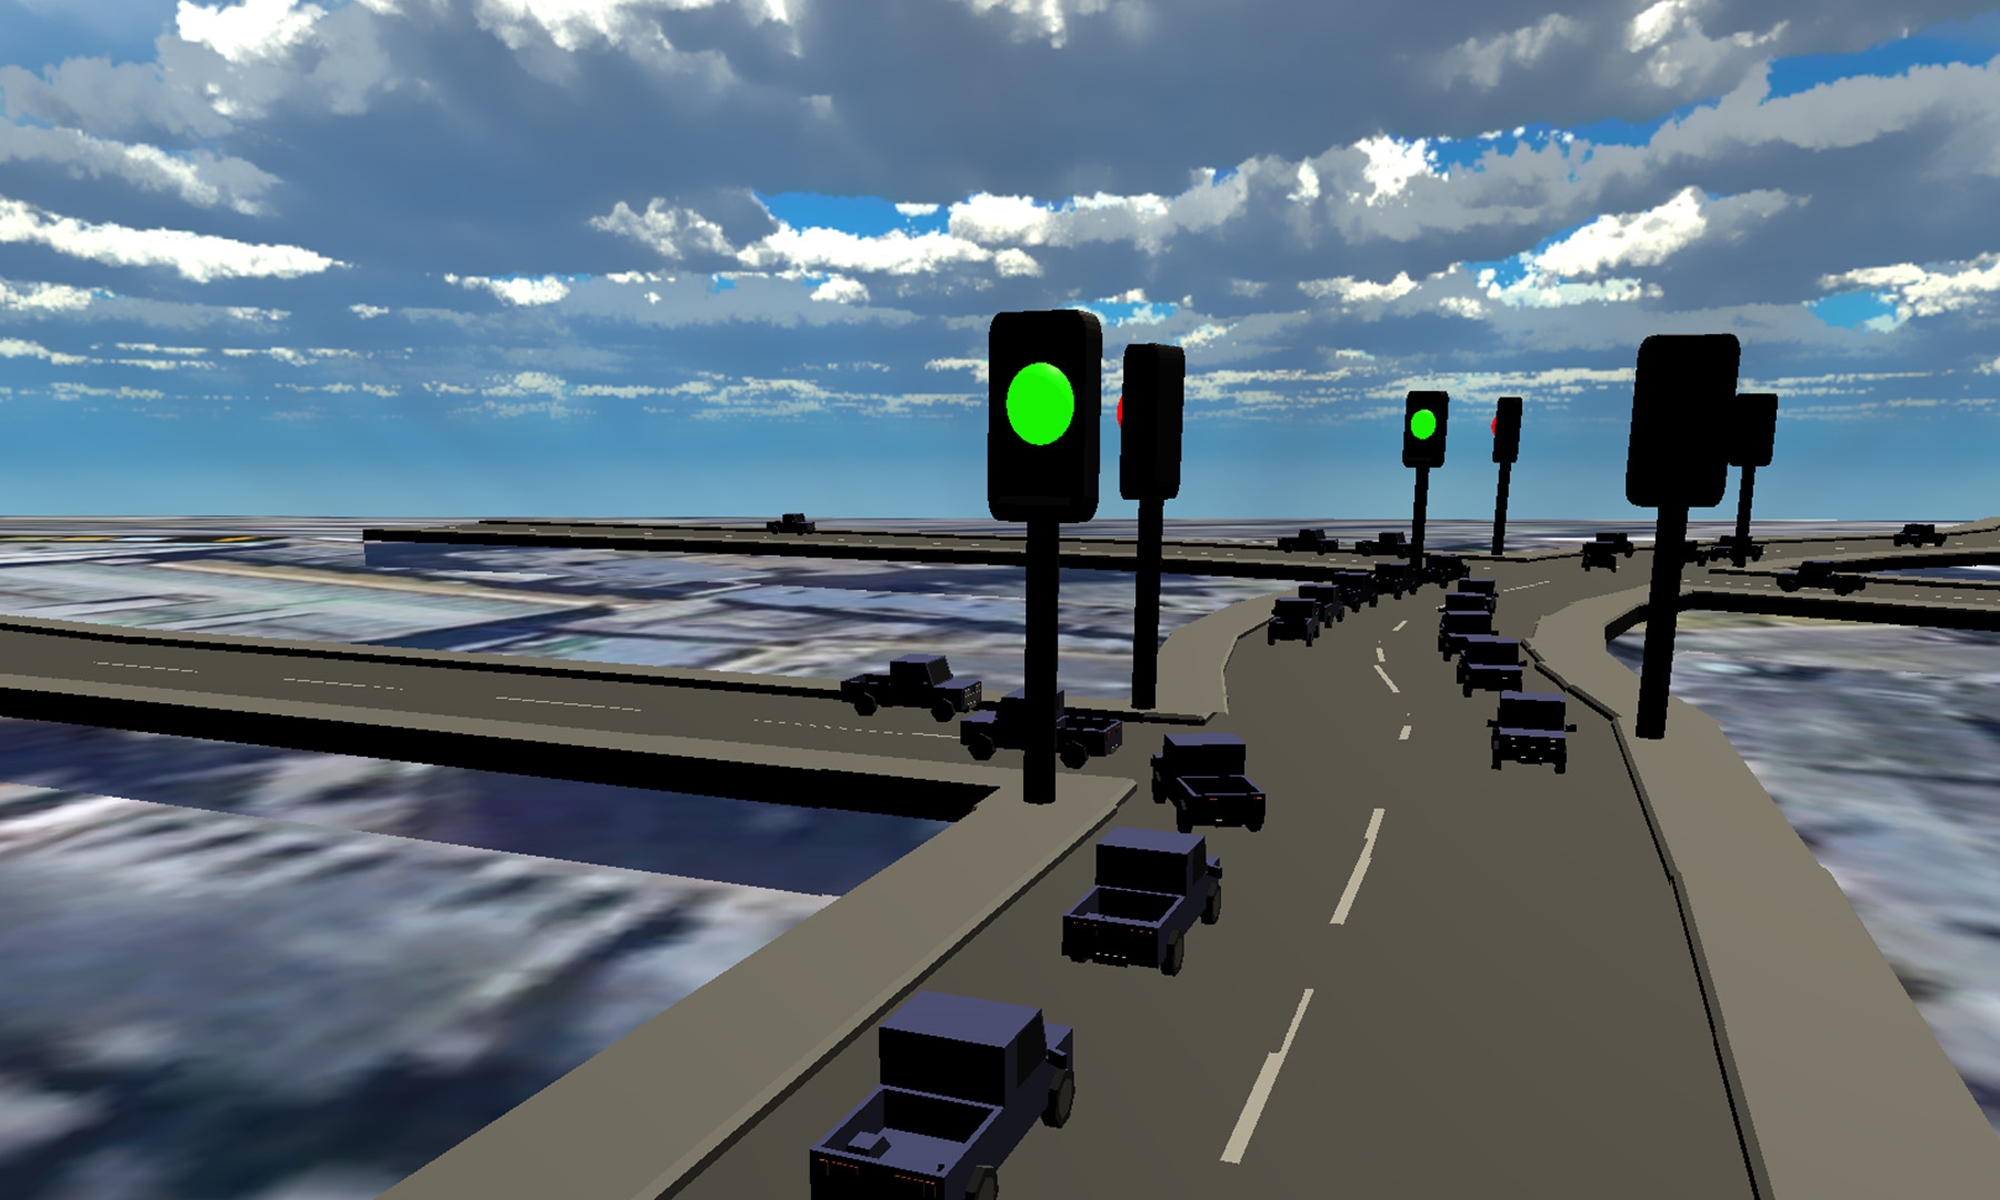 “Improving Traffic Flow using Artificial Intelligence” is a 2021 Digital Graduate Show project by Nikolaos Poritiadis, a Computing student at Abertay University.    